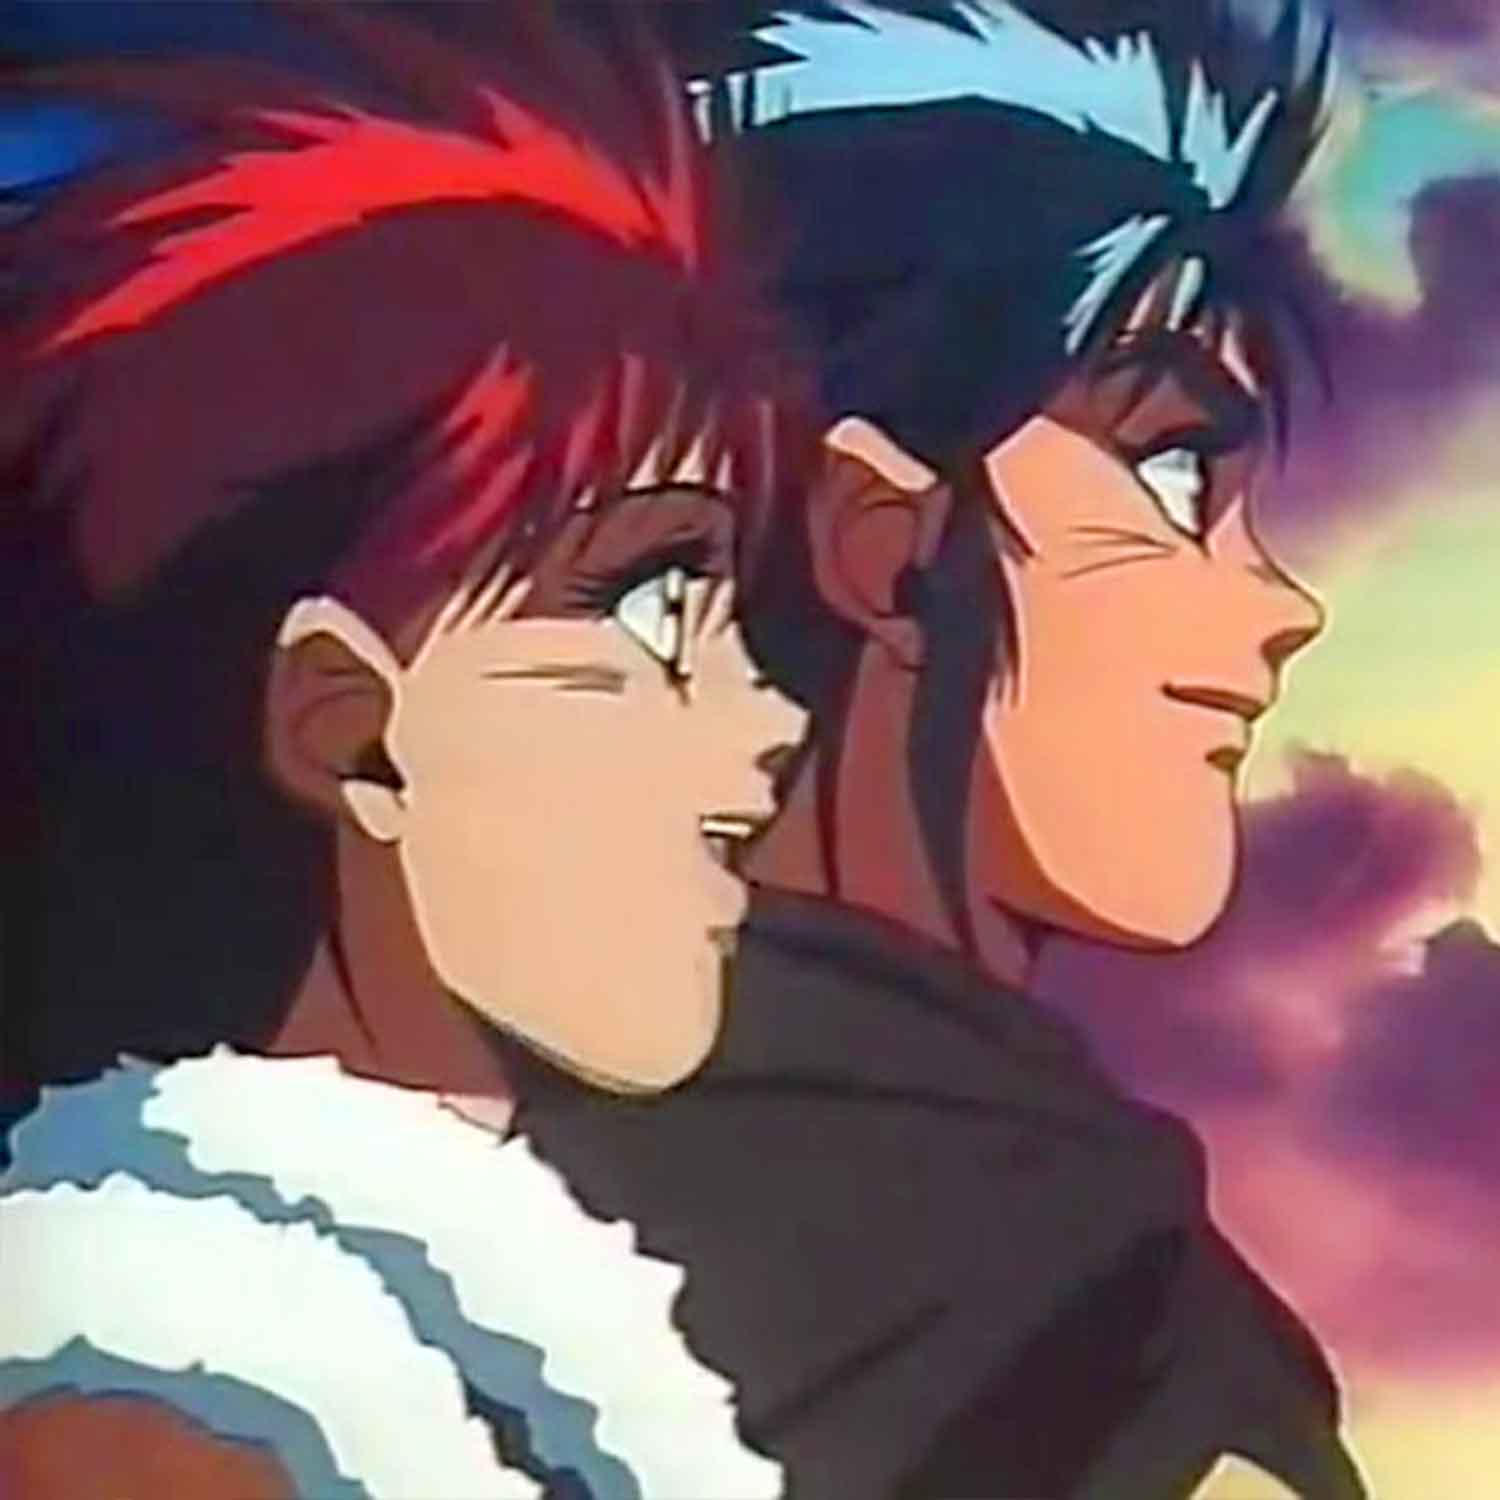 Dragon Slayer OVA | Watch or download this movie dubbed